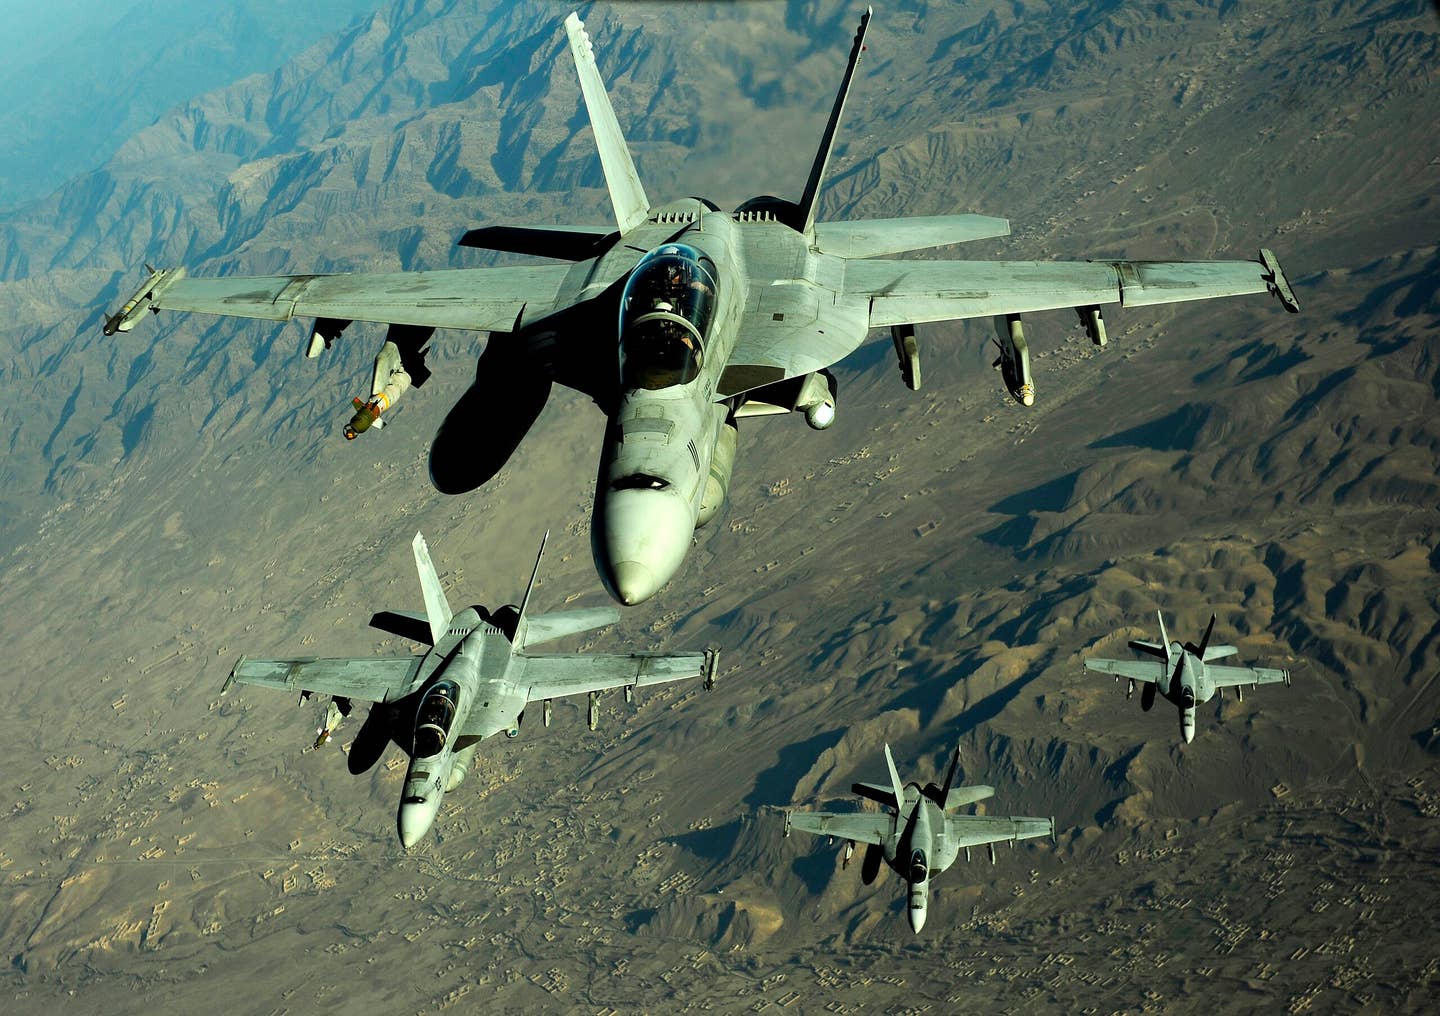 Four U.S. Navy F/A-18 Hornet aircraft fly over mountains in Afghanistan Nov. 25, 2010. (DoD photo by Staff Sgt. Andy M. Kin, U.S. Air Force/Released)